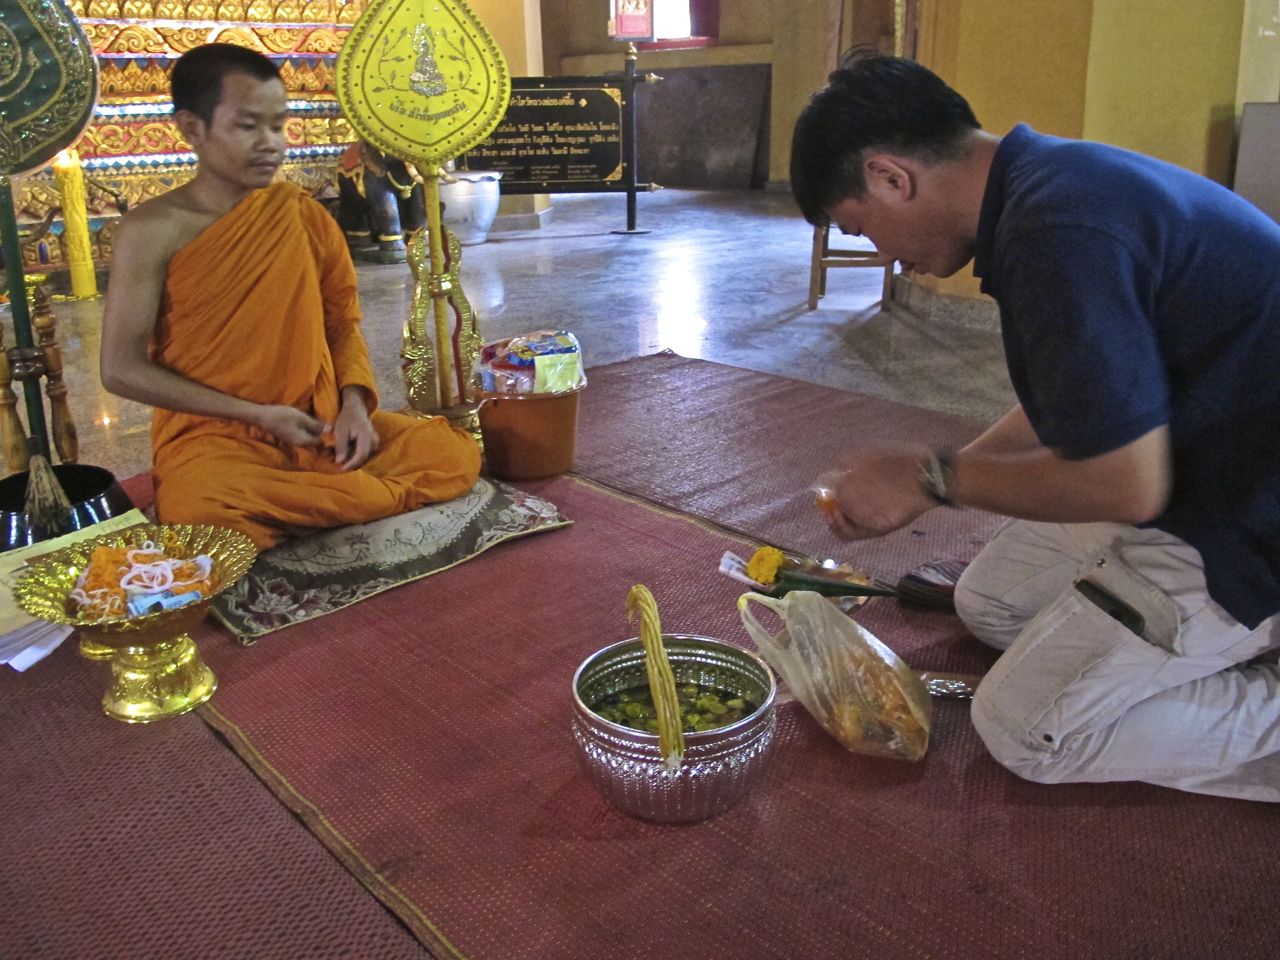 Making Buddhist offerings